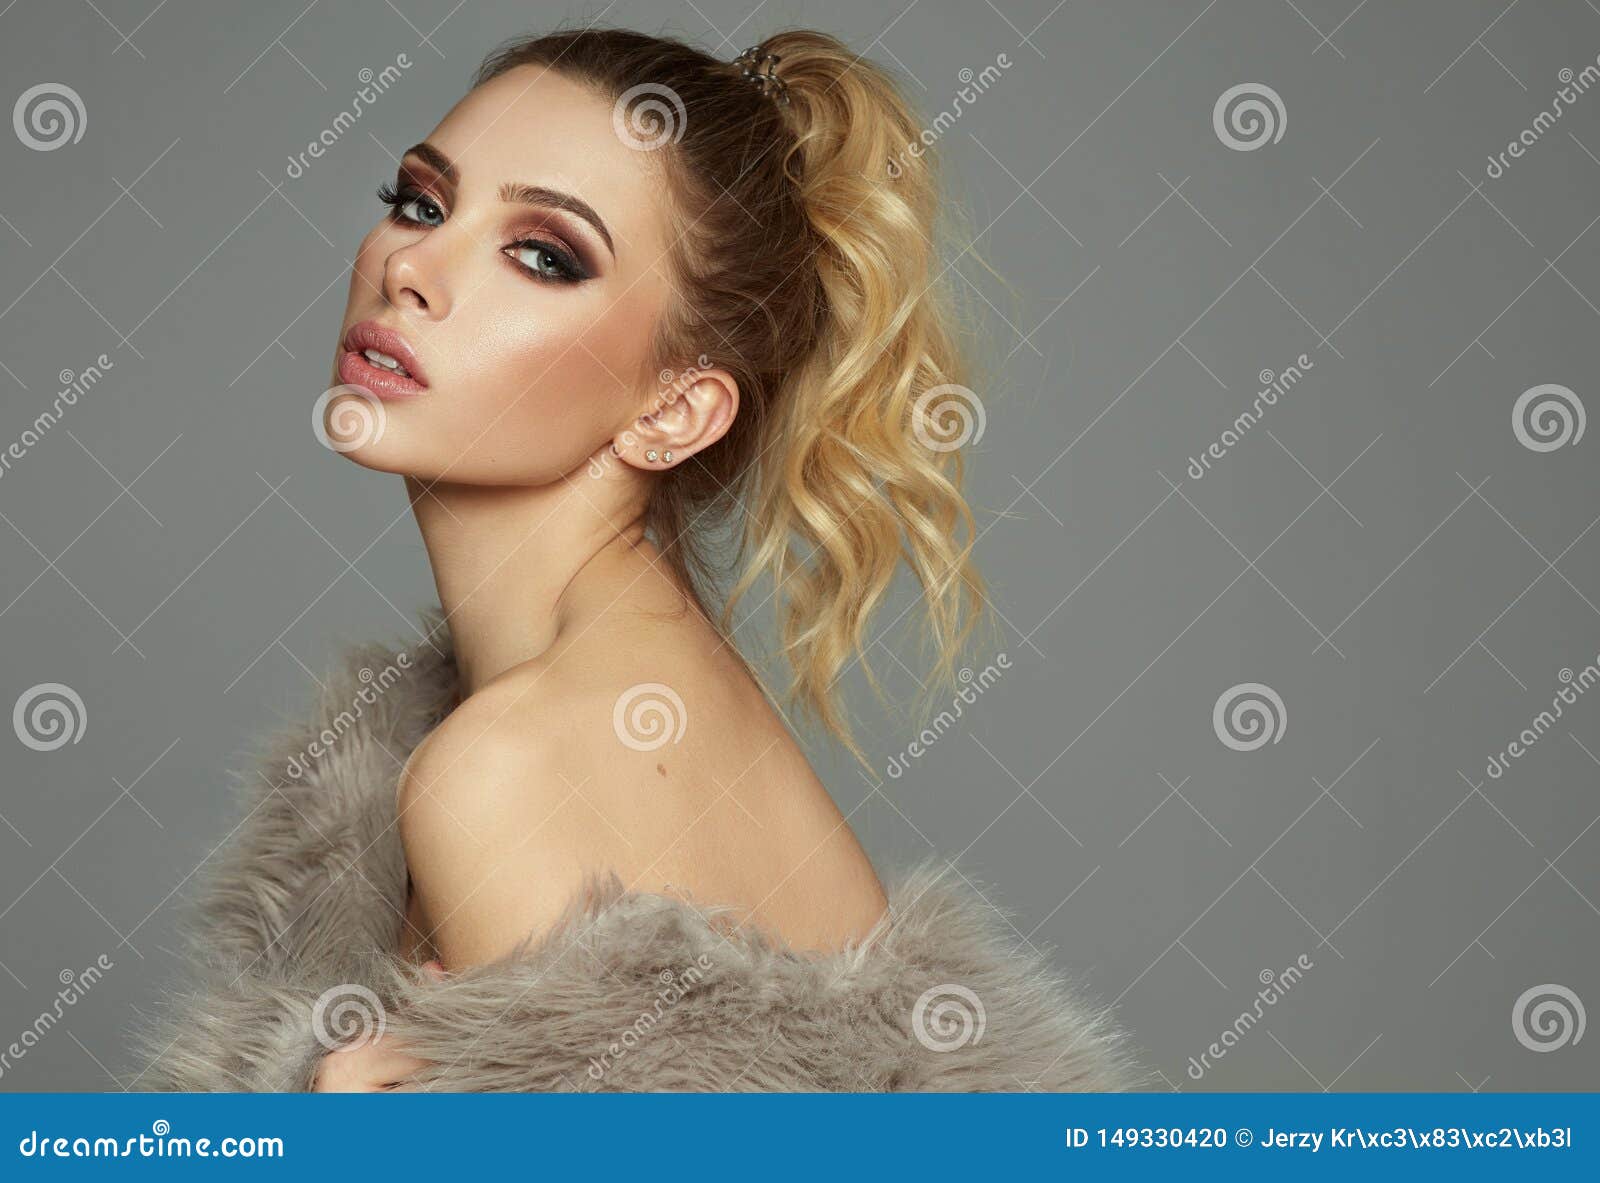 photo of blond female model with faux fur